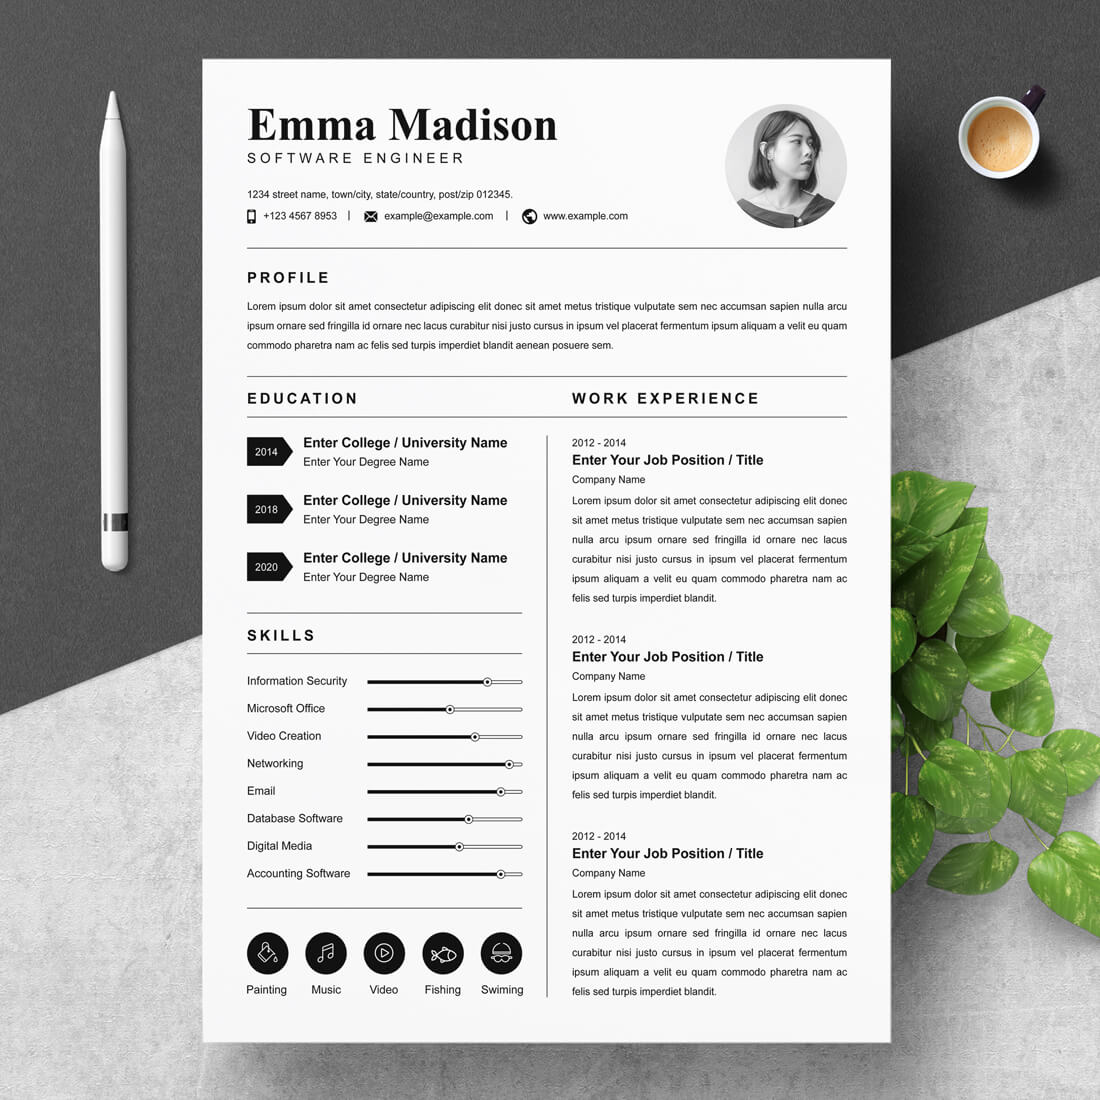 Software Engineer Resume Template | Application Developer Resume Template main cover.